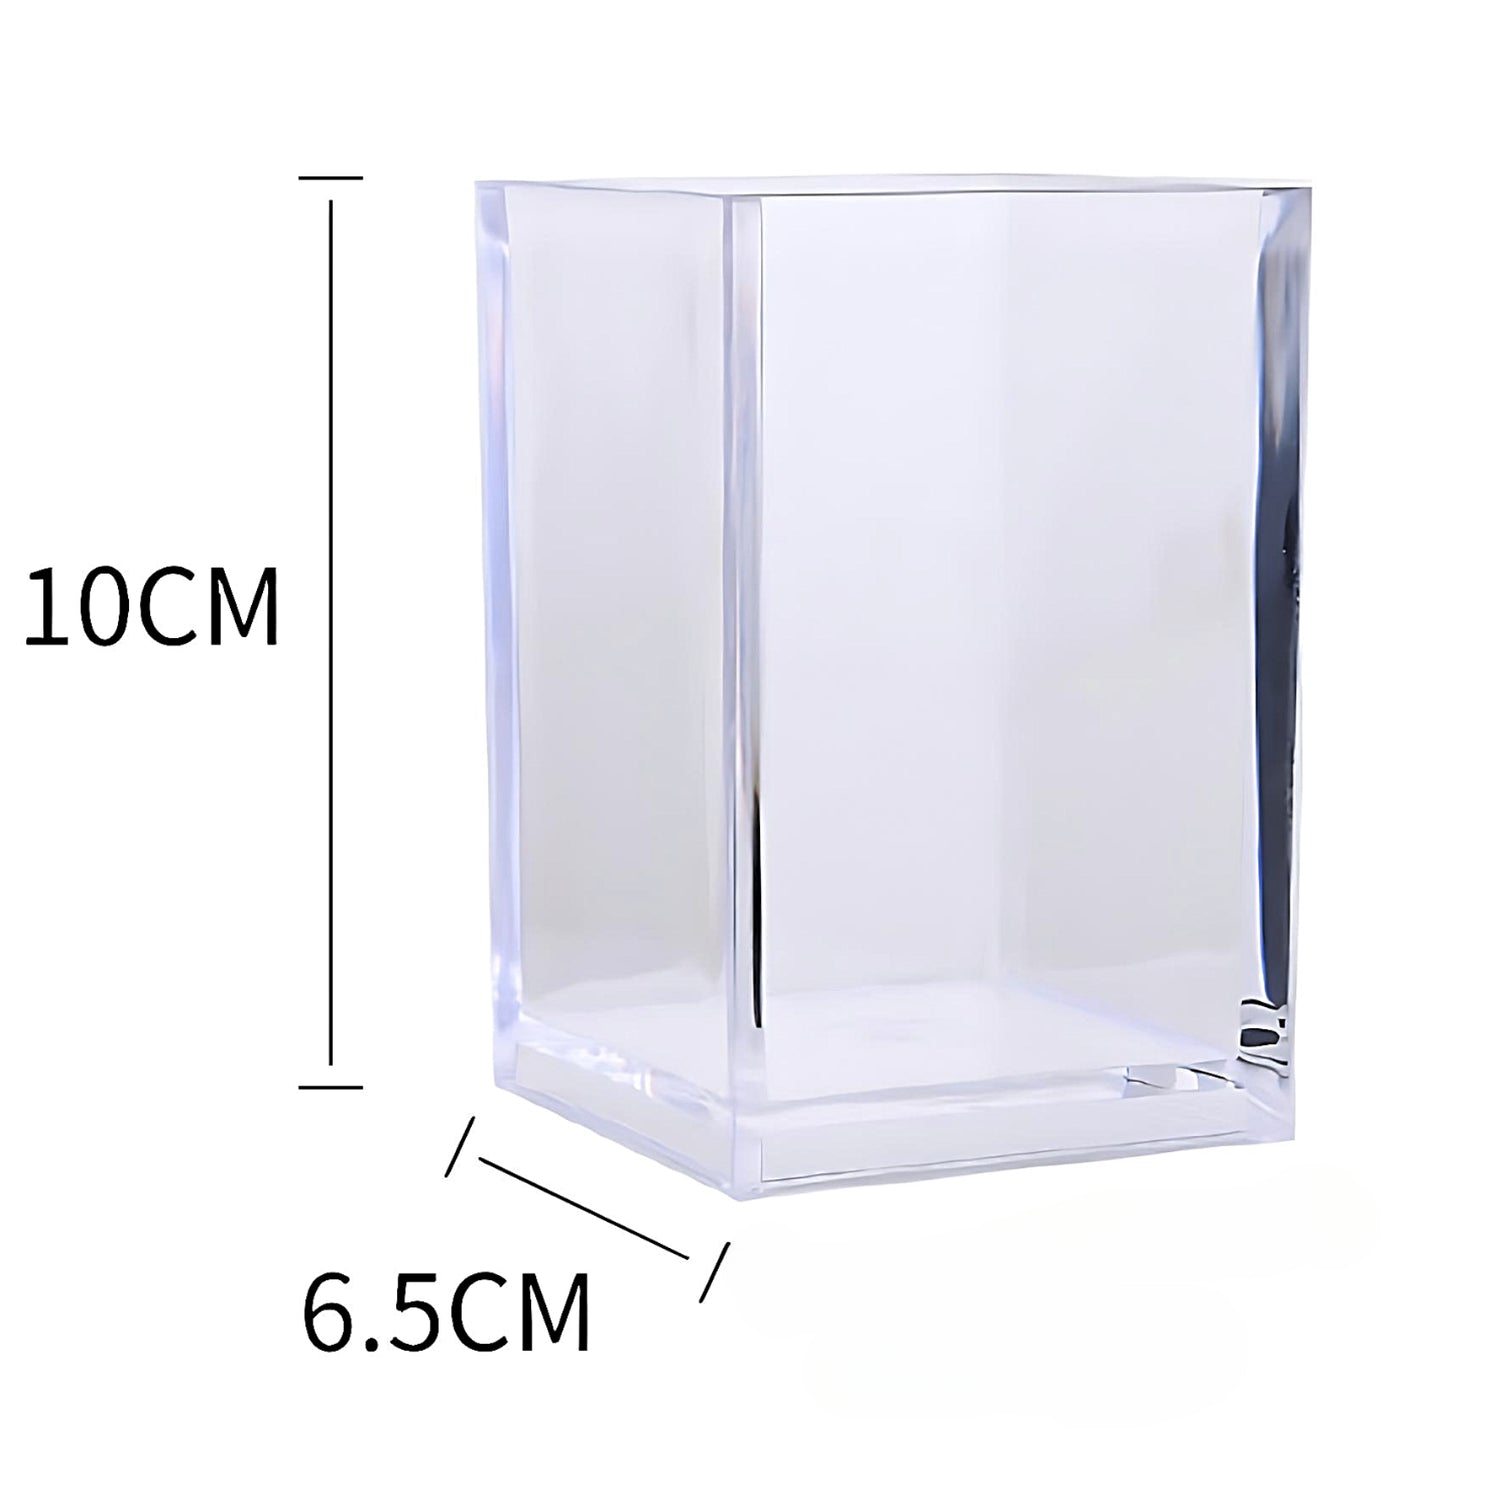 the dimensions of a transparent pen holder, white background